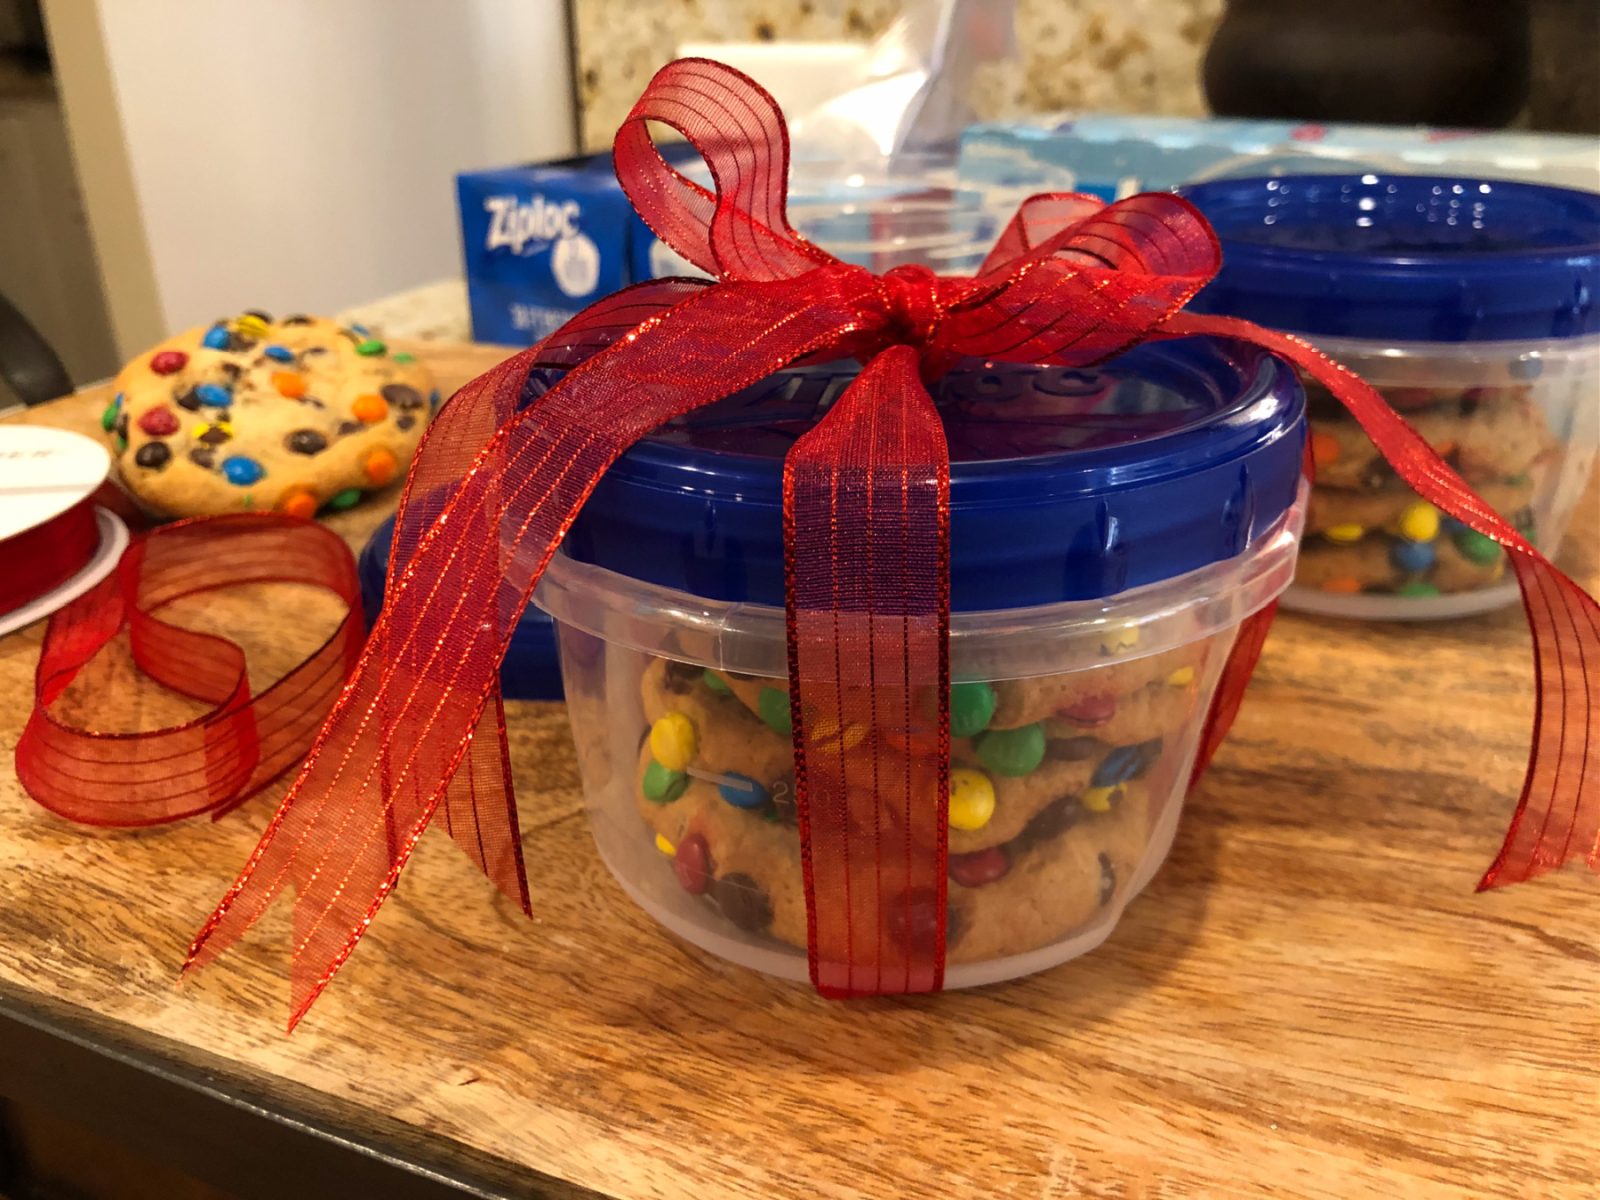 Ziploc® Brand Bags & Containers Make Gift Giving Easy – Limited Edition Designs Available At Publix